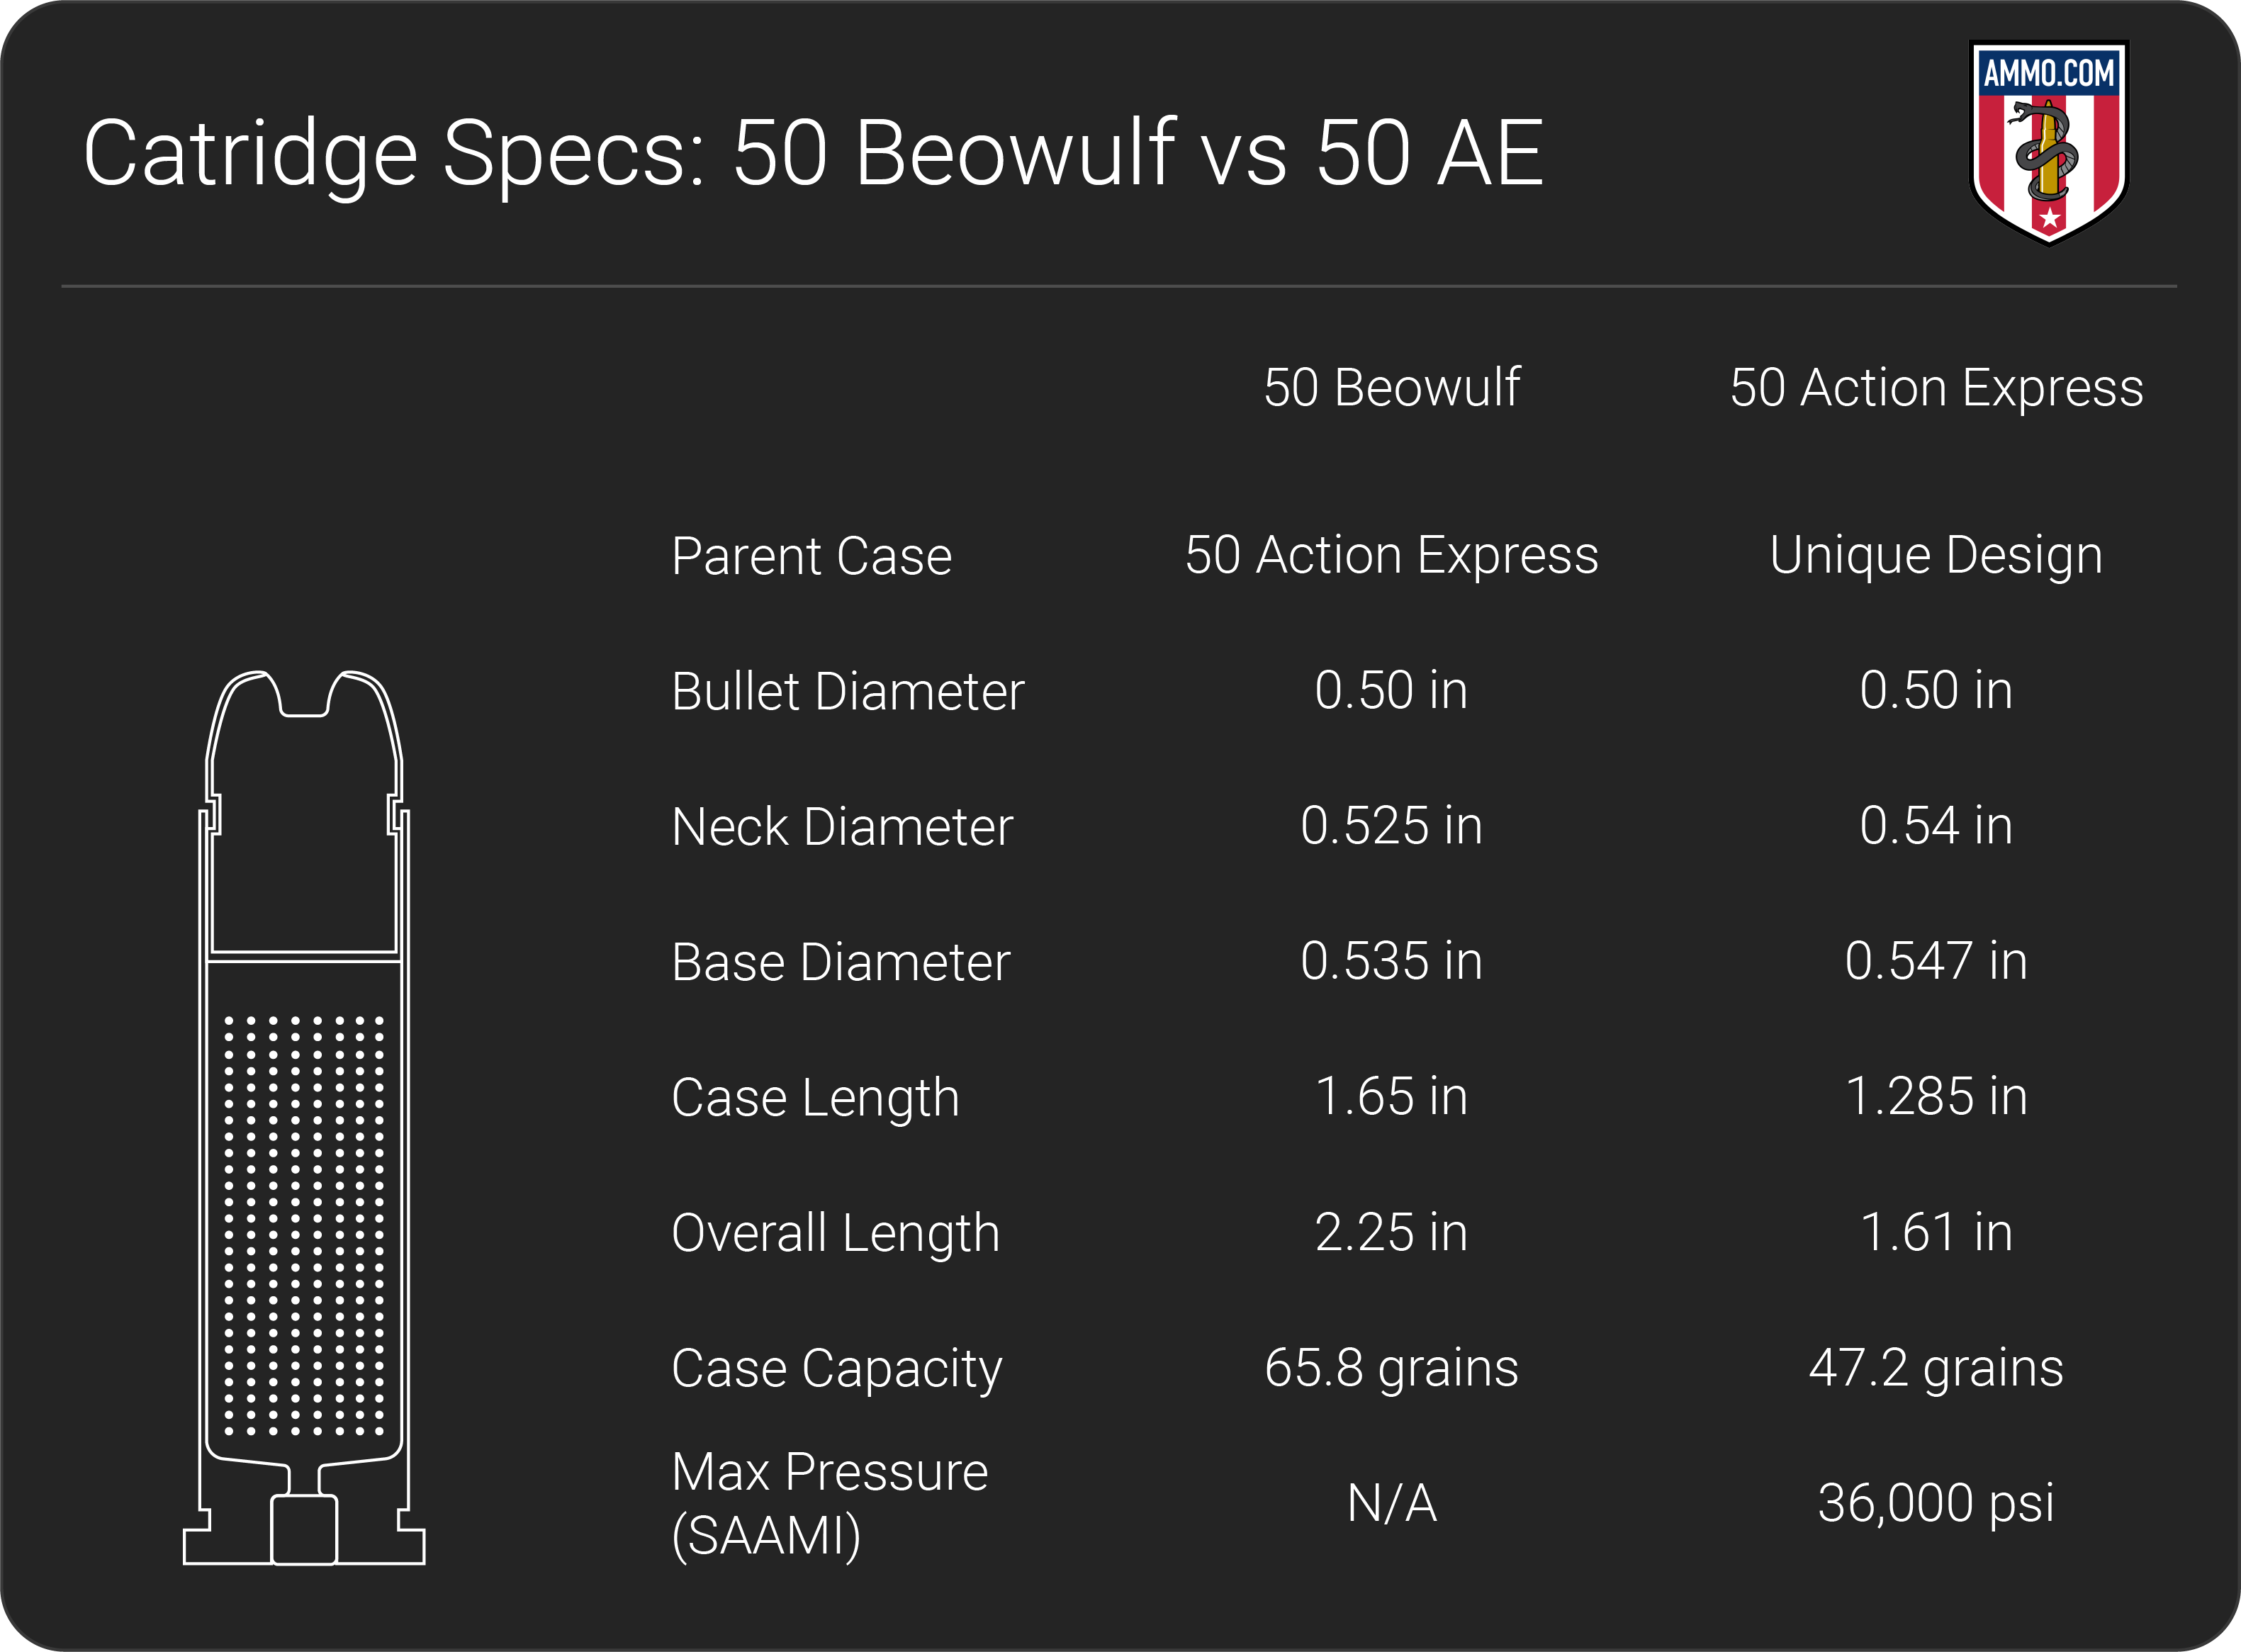 50 Beowulf vs 50 AE dimension chart